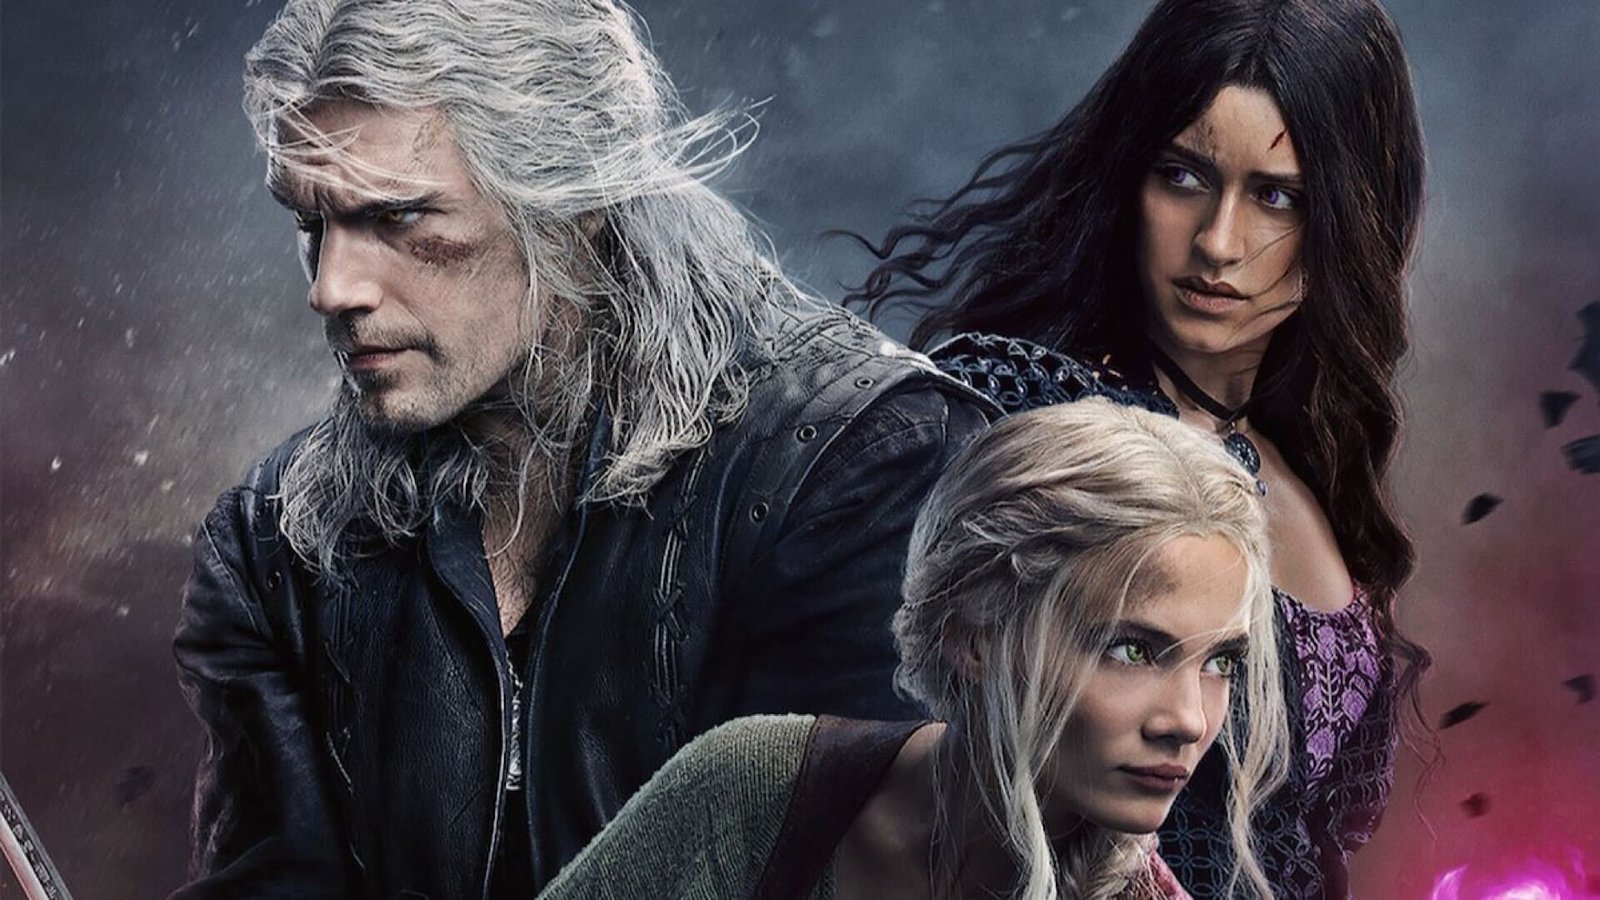 The Witcher Season 4 Will Feature A Special Episode Titled 'The Rats: A Witcher Tale'